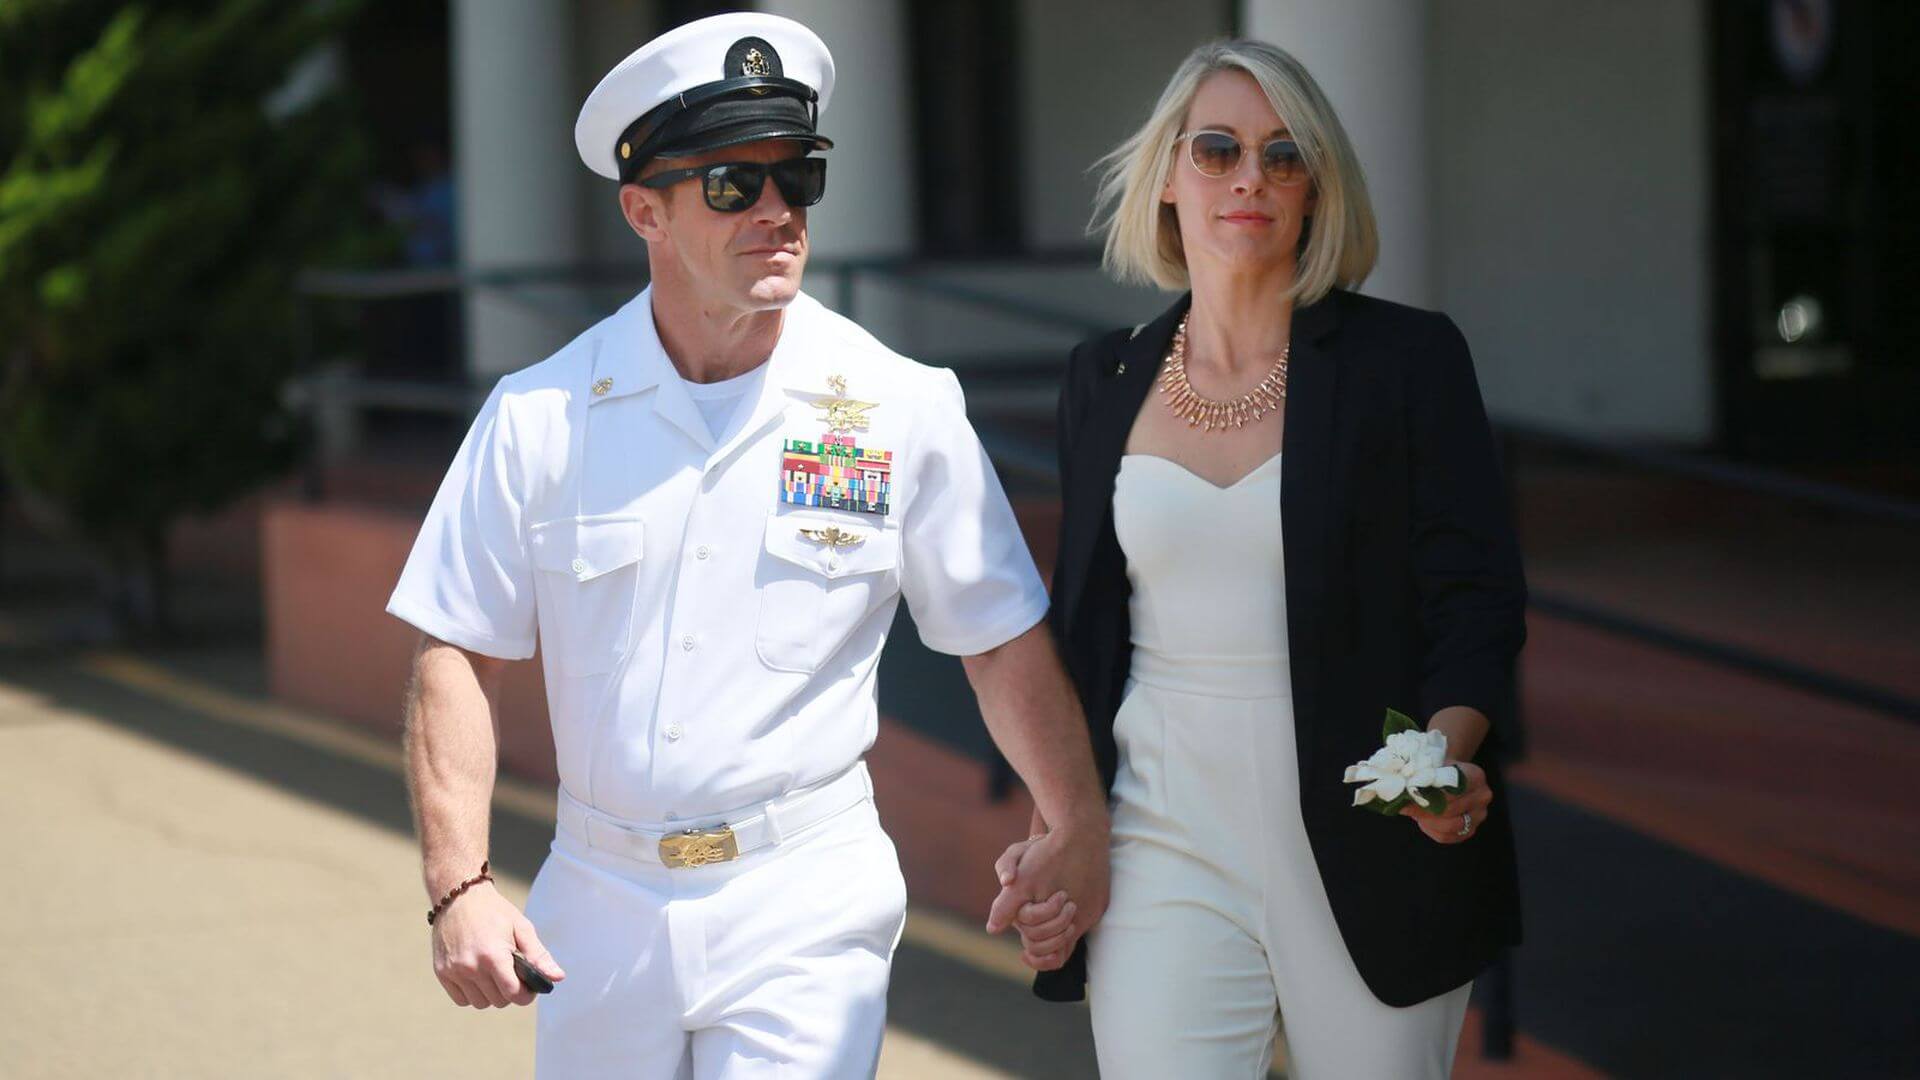 Eddie Gallagher Navy Charges, Wife, Net Worth, Tattoo, & More